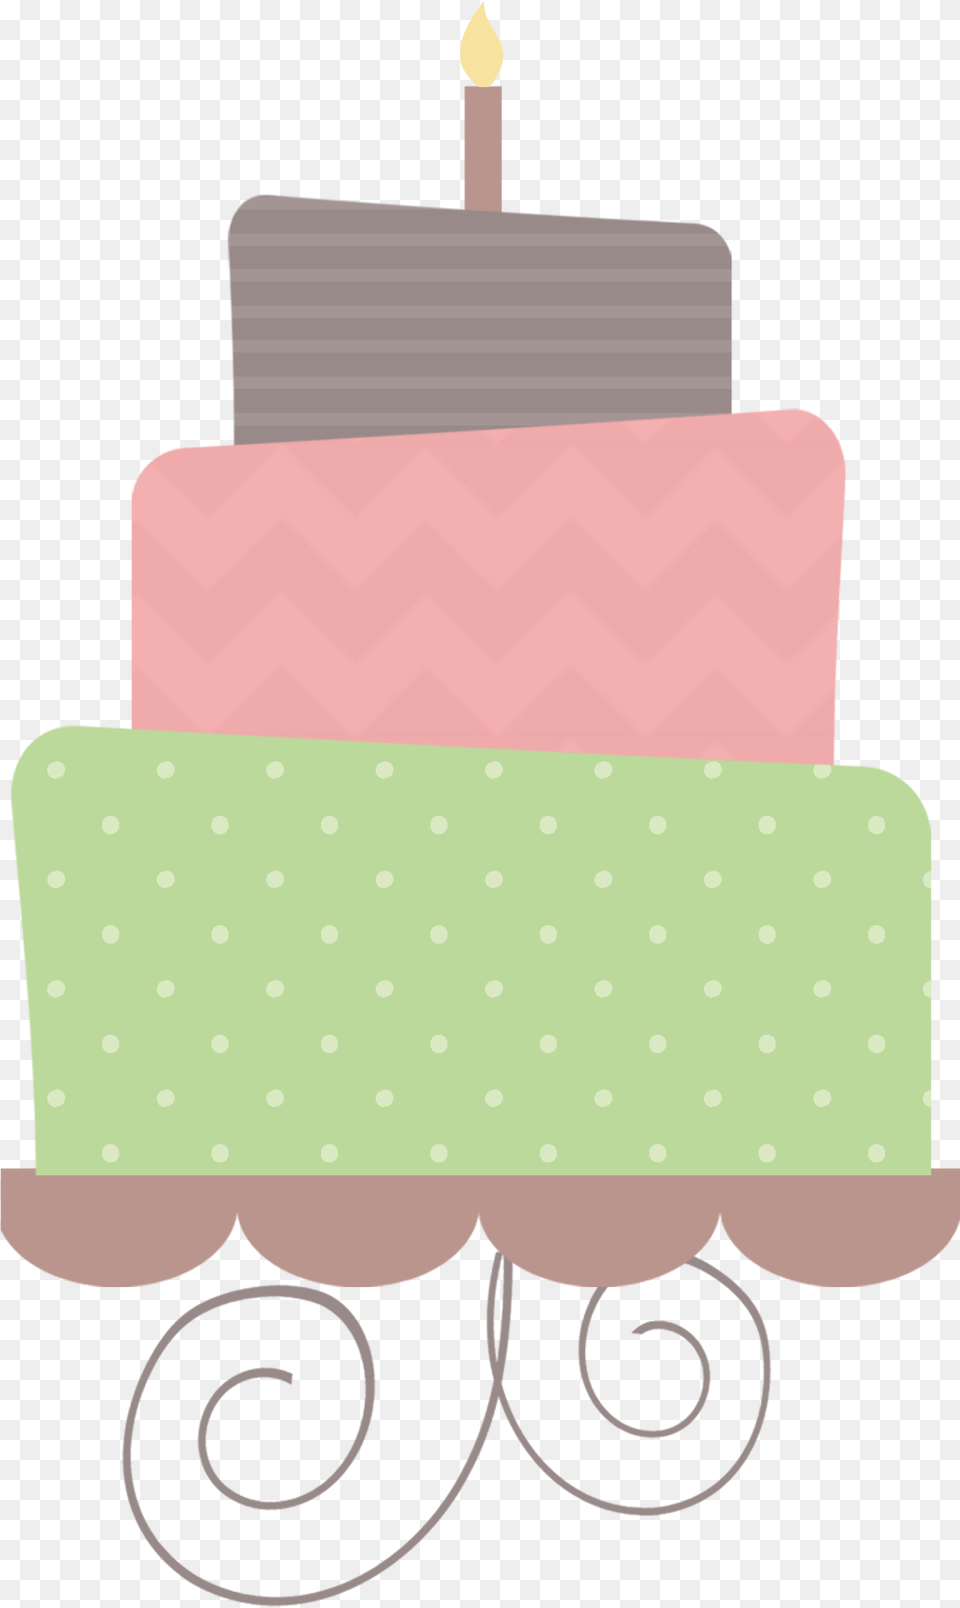 Download For Cake In High Resolution Birthday Cake, Birthday Cake, Cream, Dessert, Food Free Transparent Png